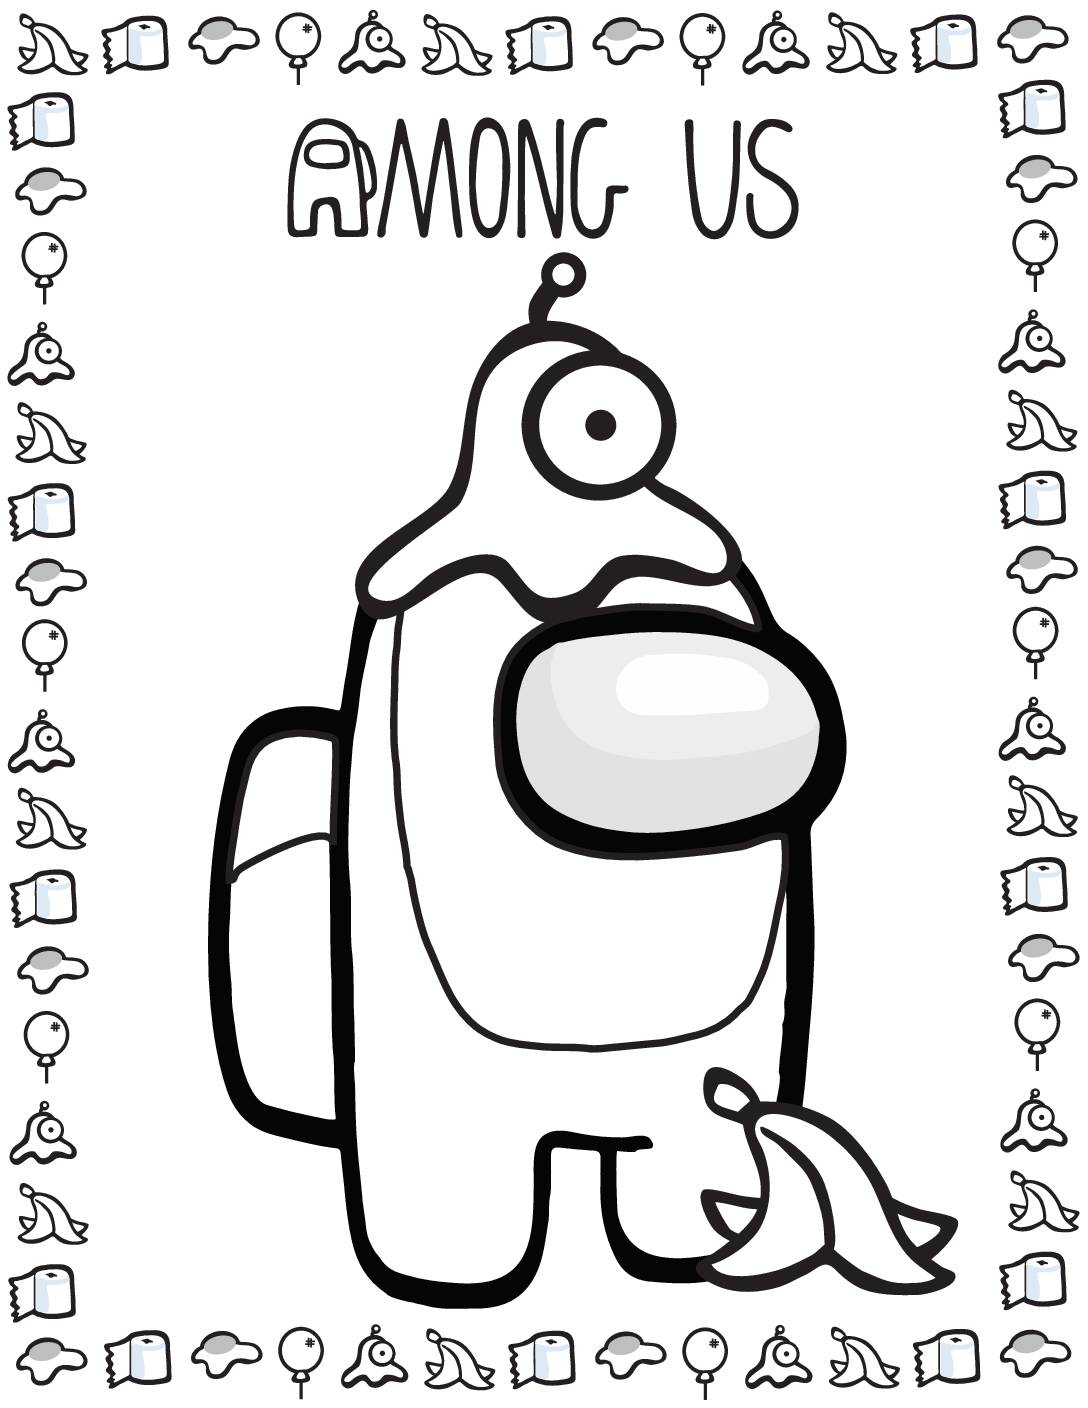 Coloring Page 5 Among US Coloring Pages